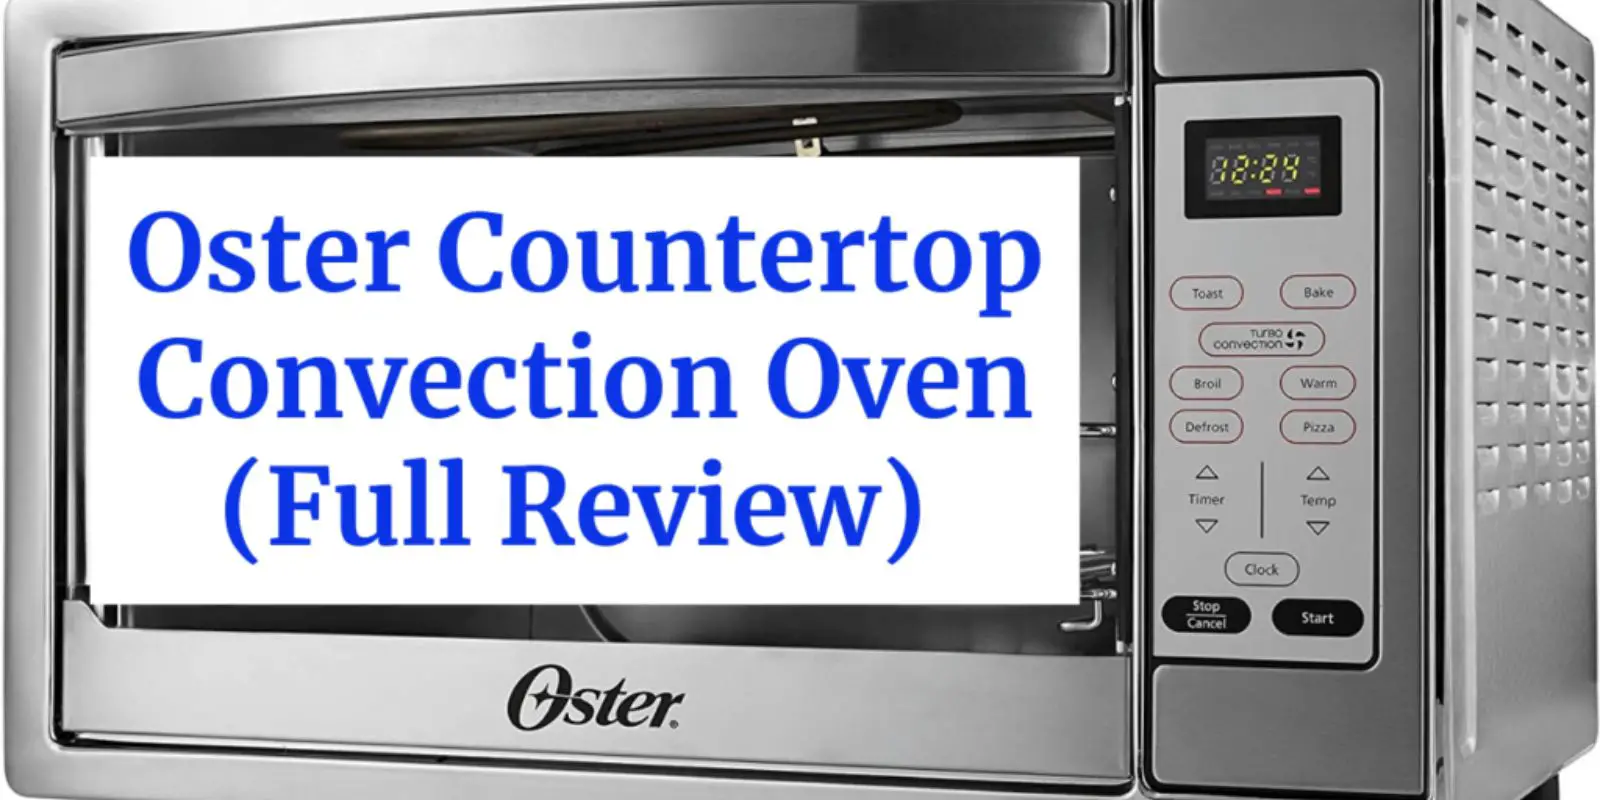 Oster Countertop Convection Oven Reviews: The Best for Your Kitchen